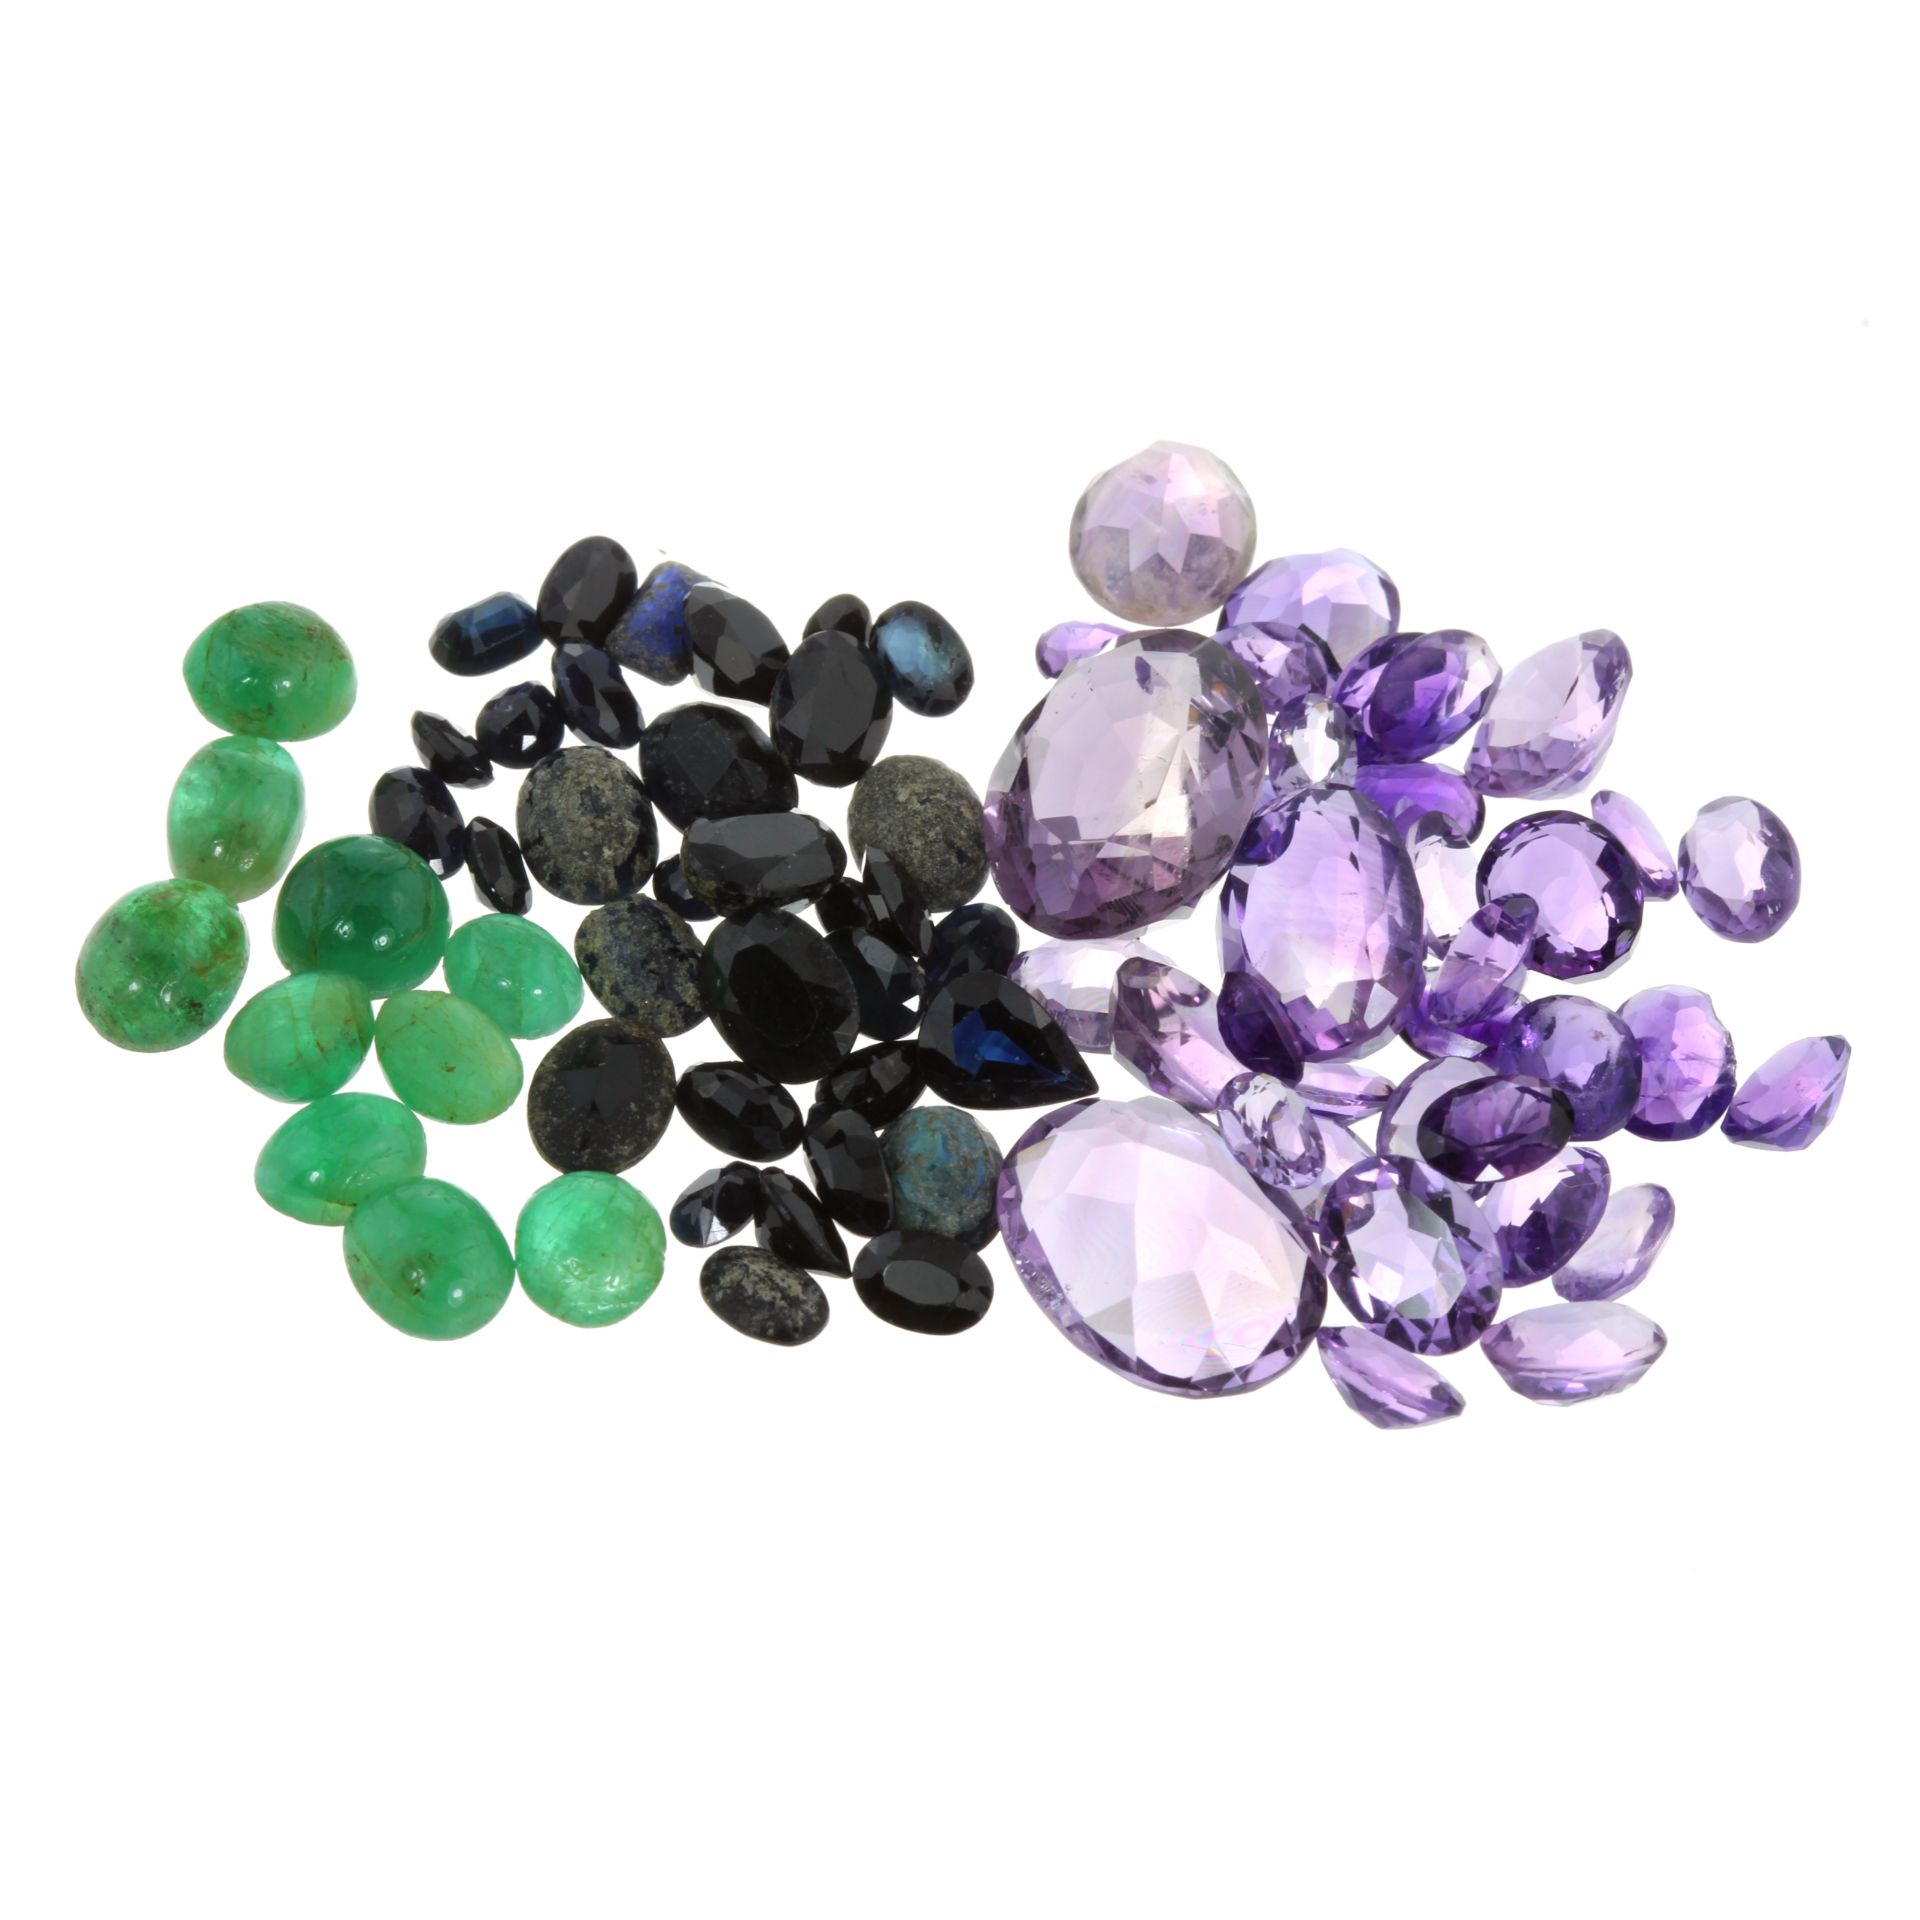 A SELECTION OF LOOSE FACETED AND POLISHED GEMSTONES to include 29.2 carats of blue sapphires, 15.5